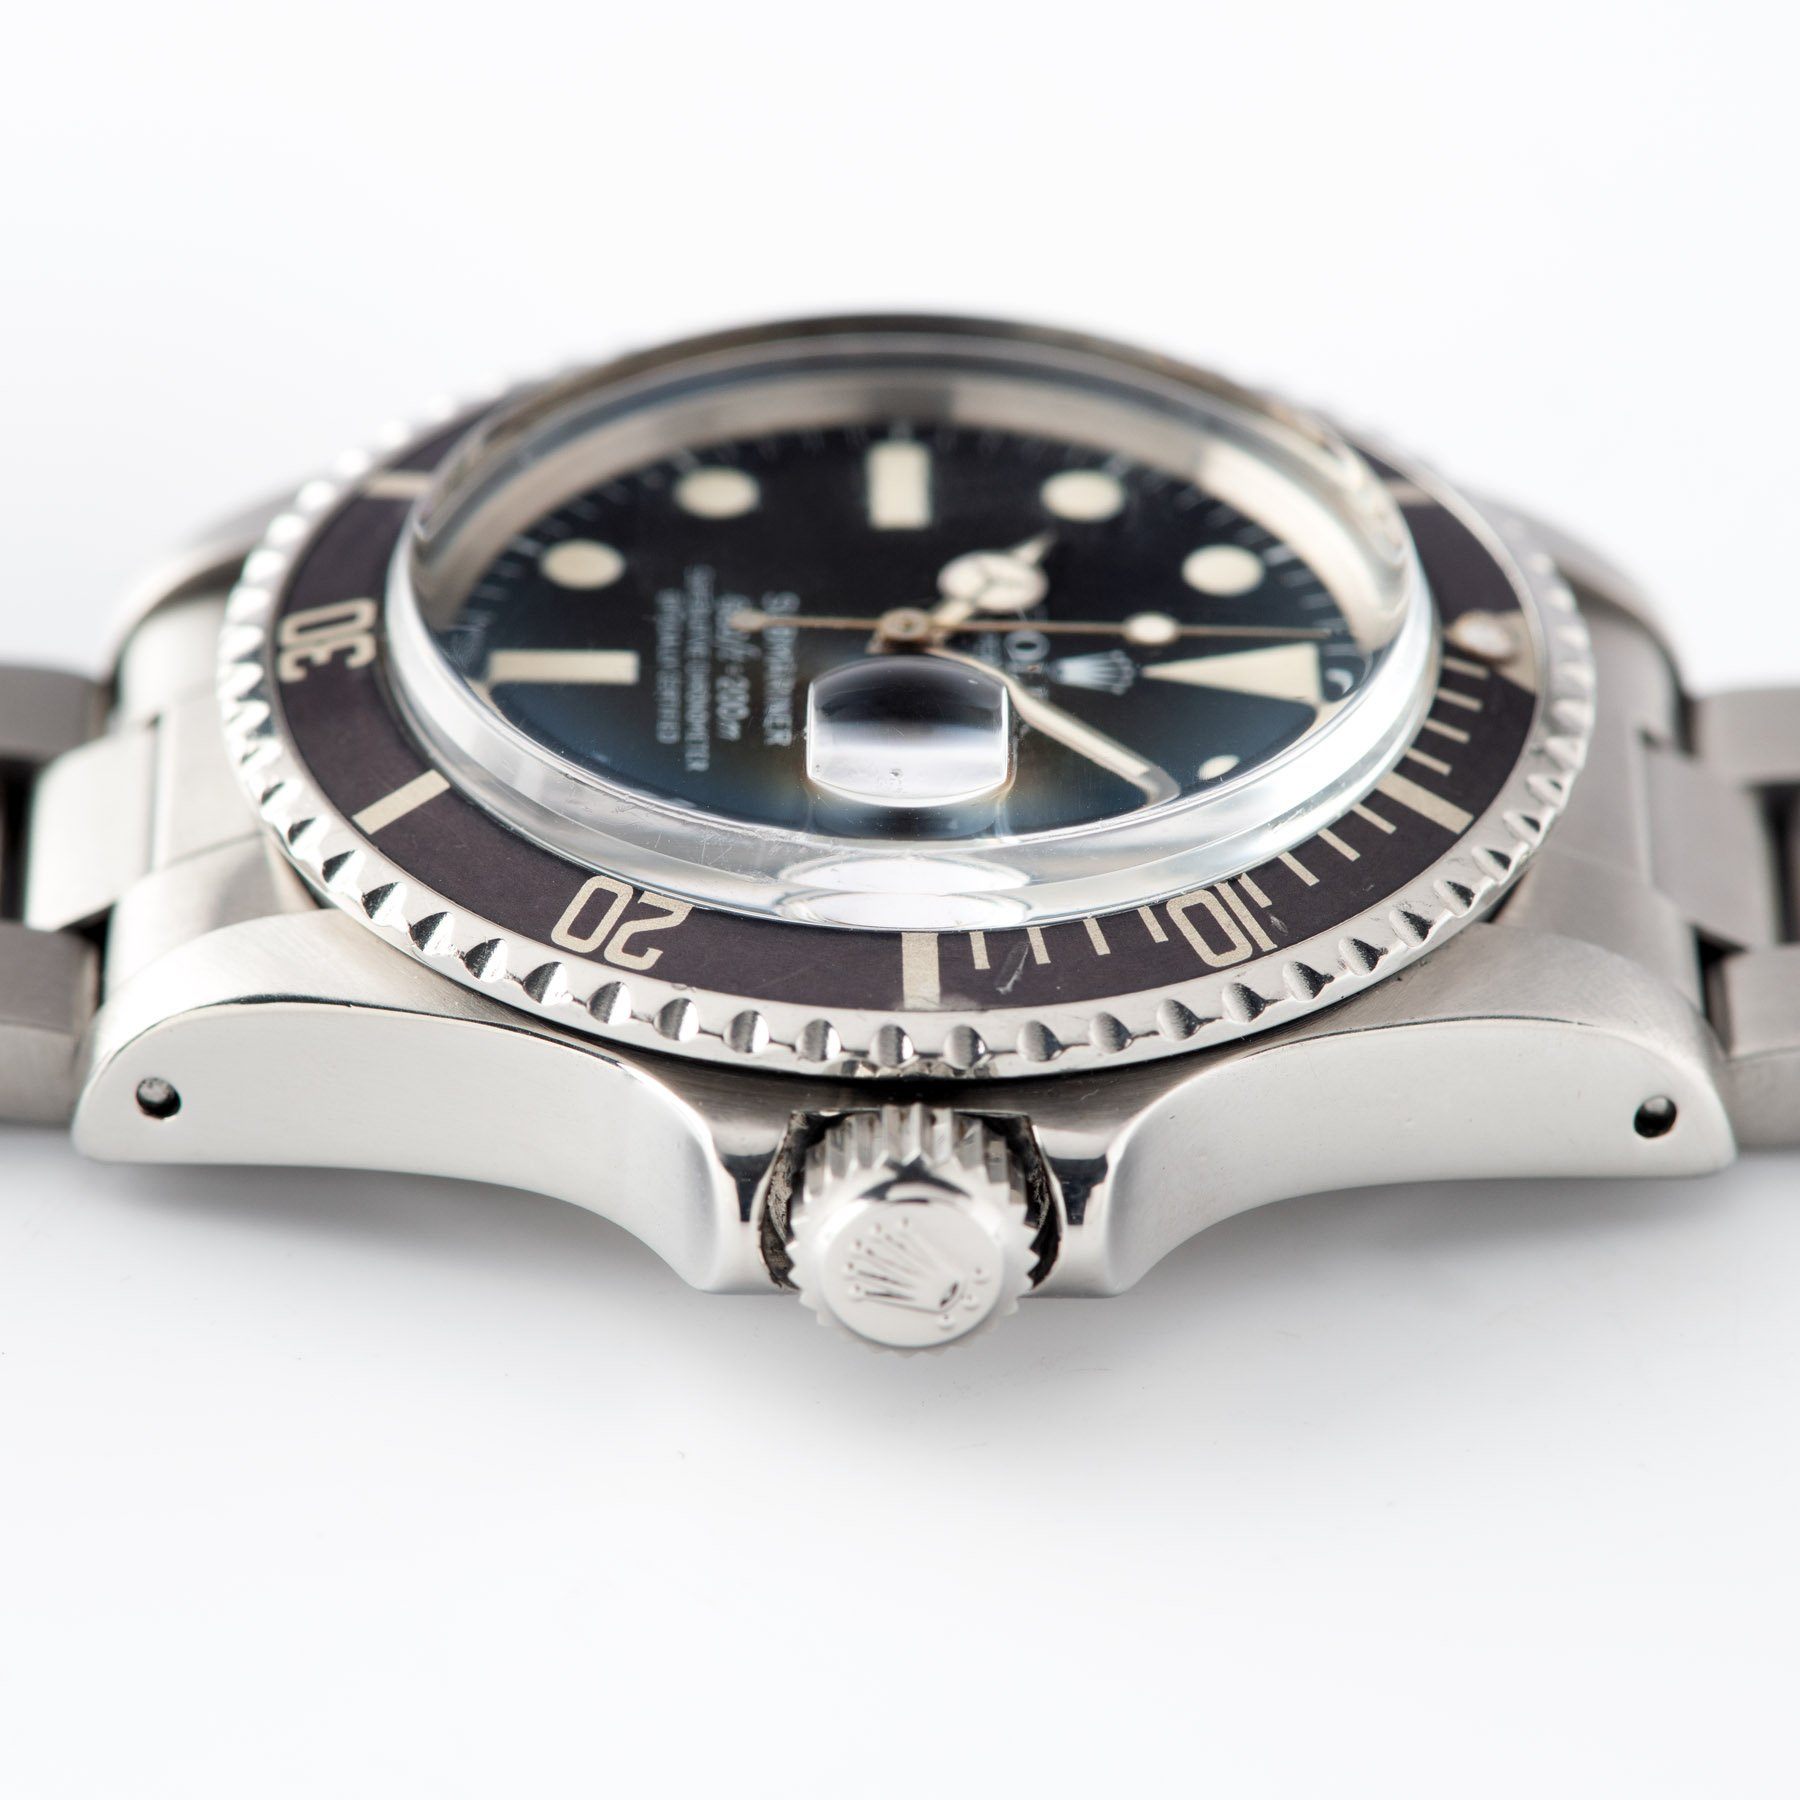 Rolex Submariner Date 1680 Mk2 Matte Dial with strong lugs and crown guards